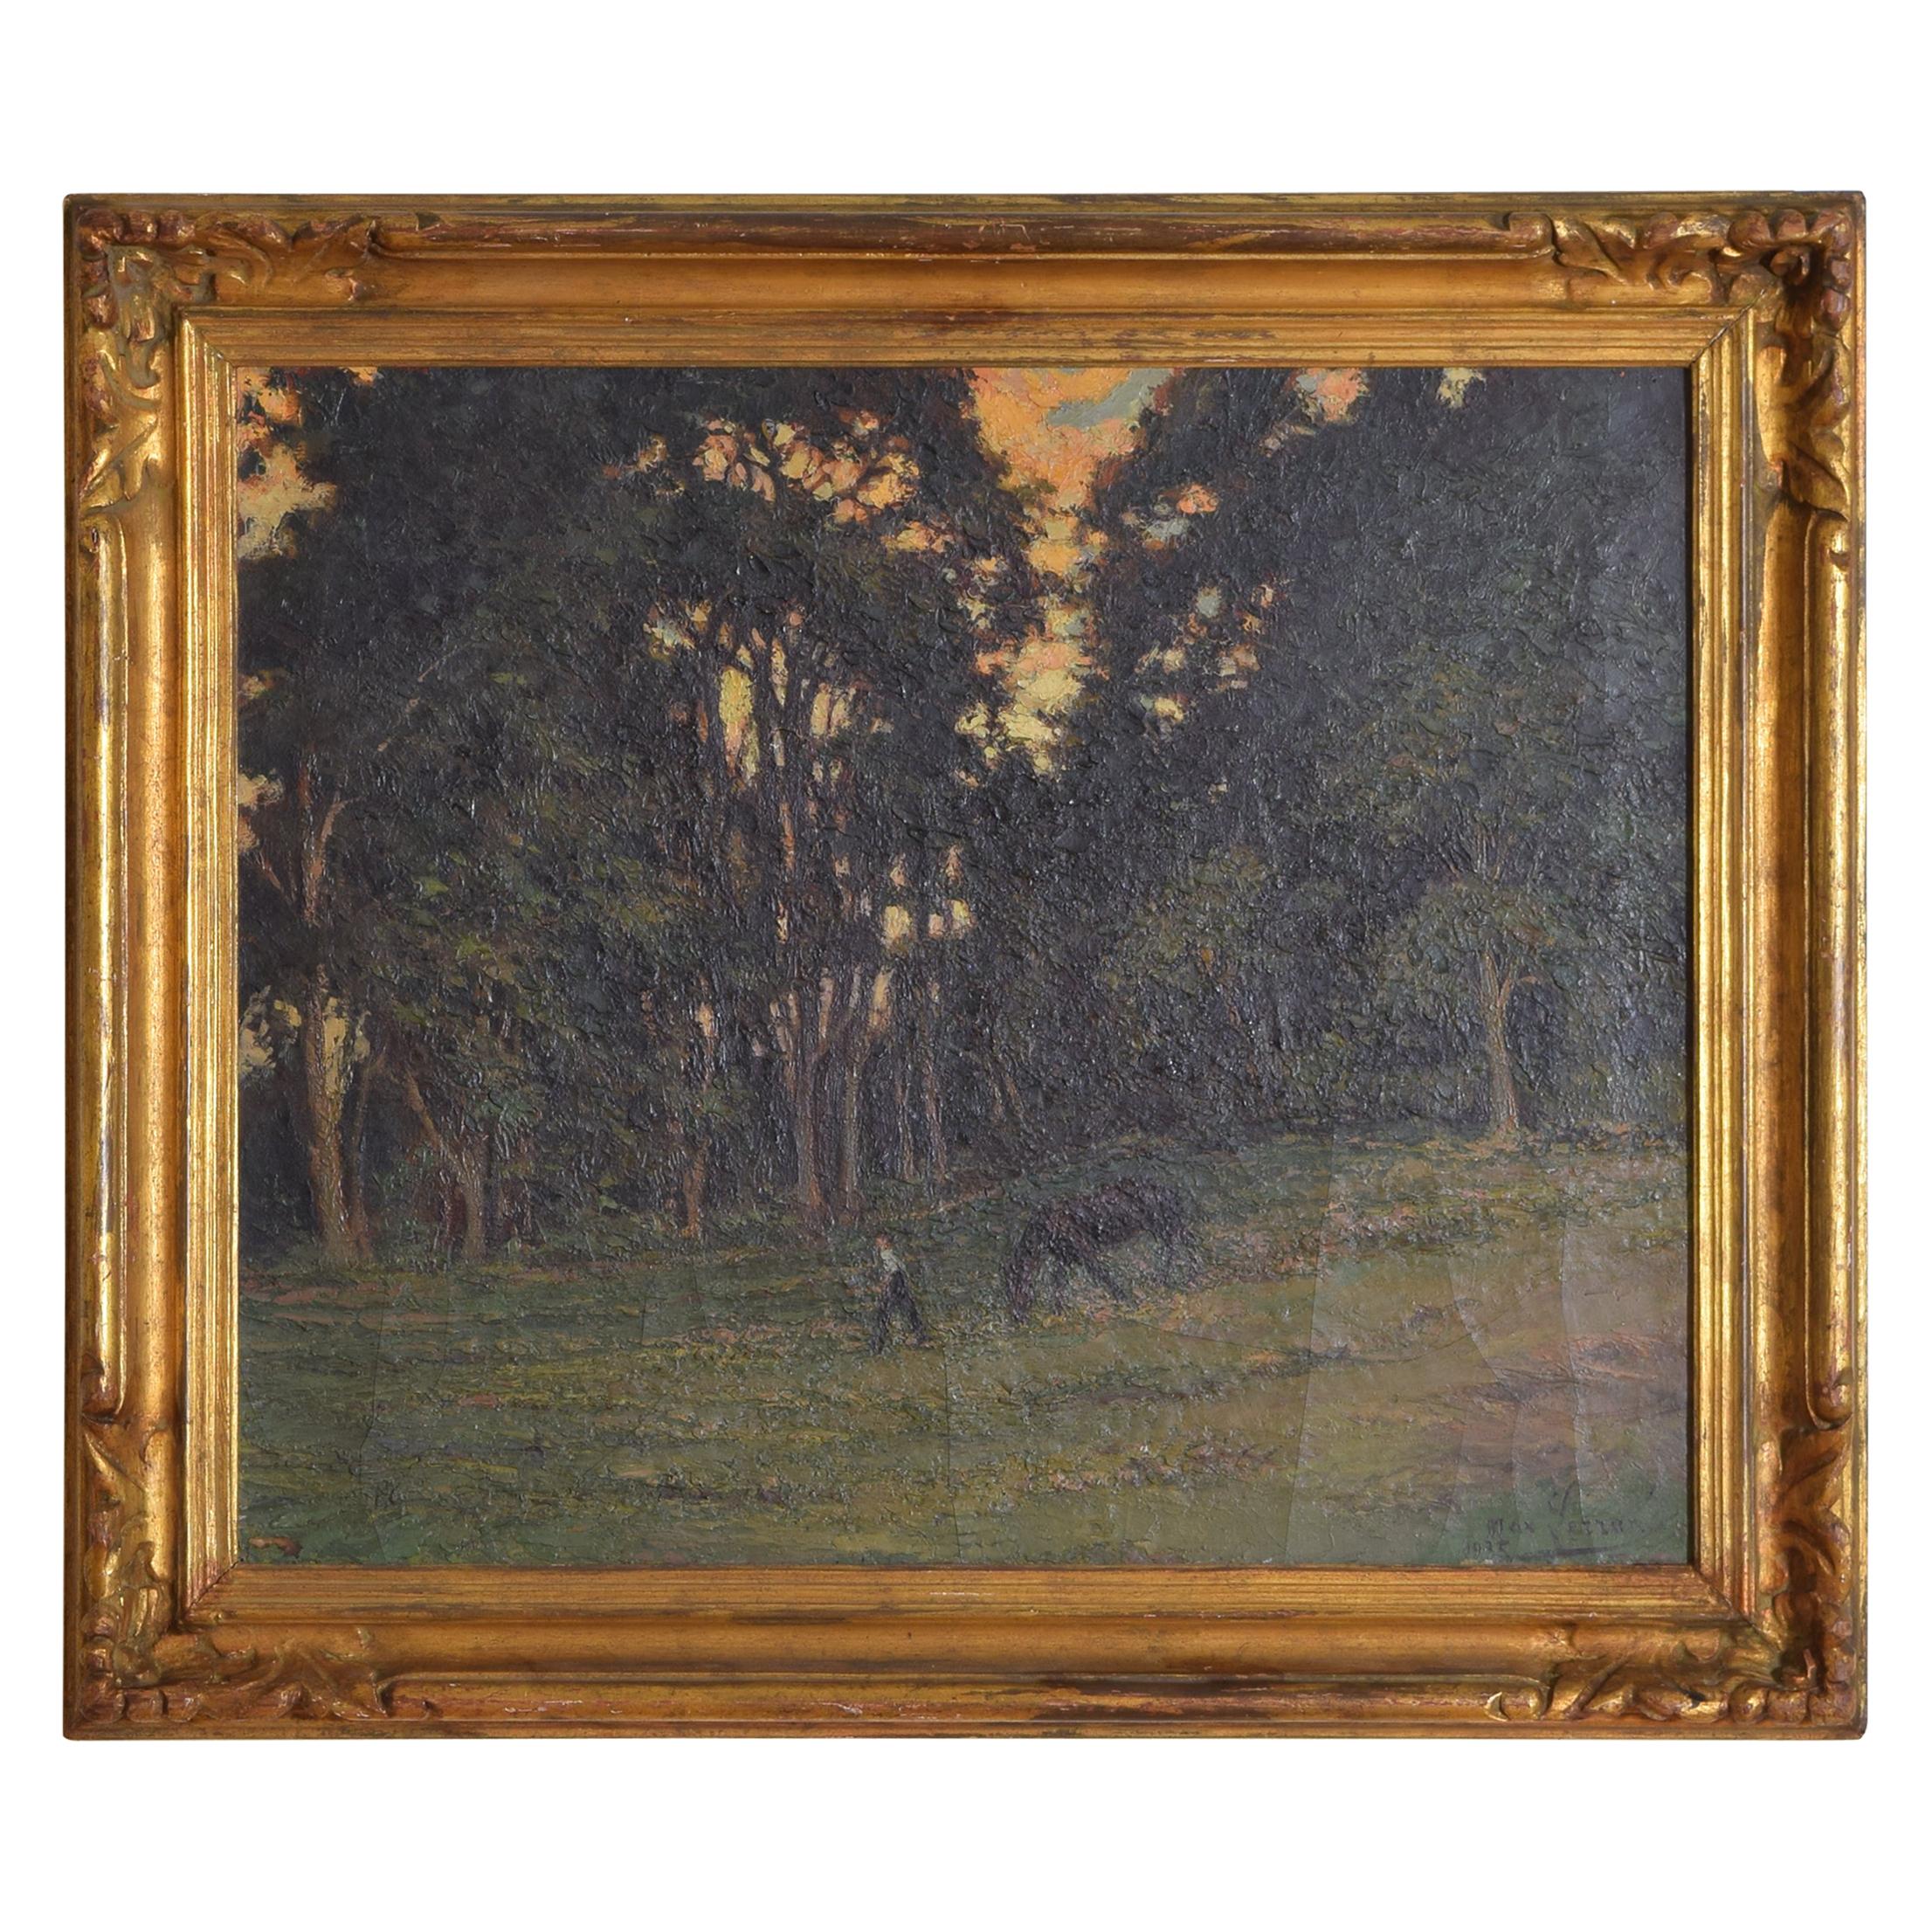 French Oil on Canvas Horse Being Led through Field Signed Lower Right circa 1920